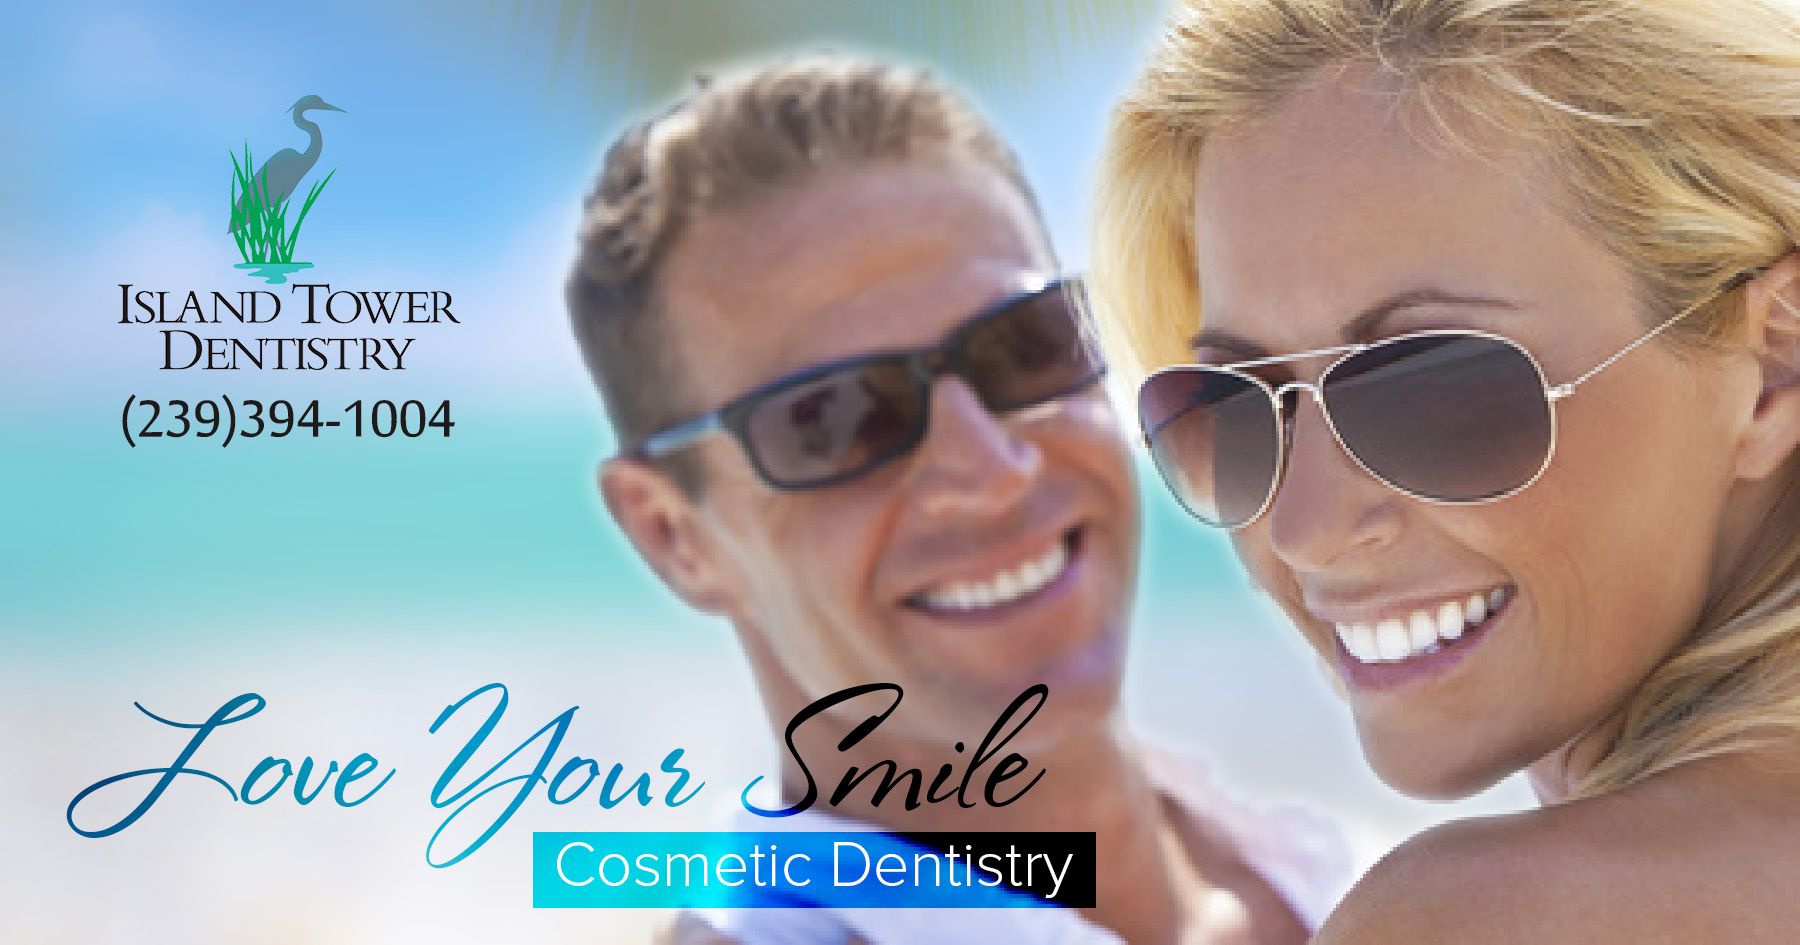 Cosmetic dentists Love Your Smile